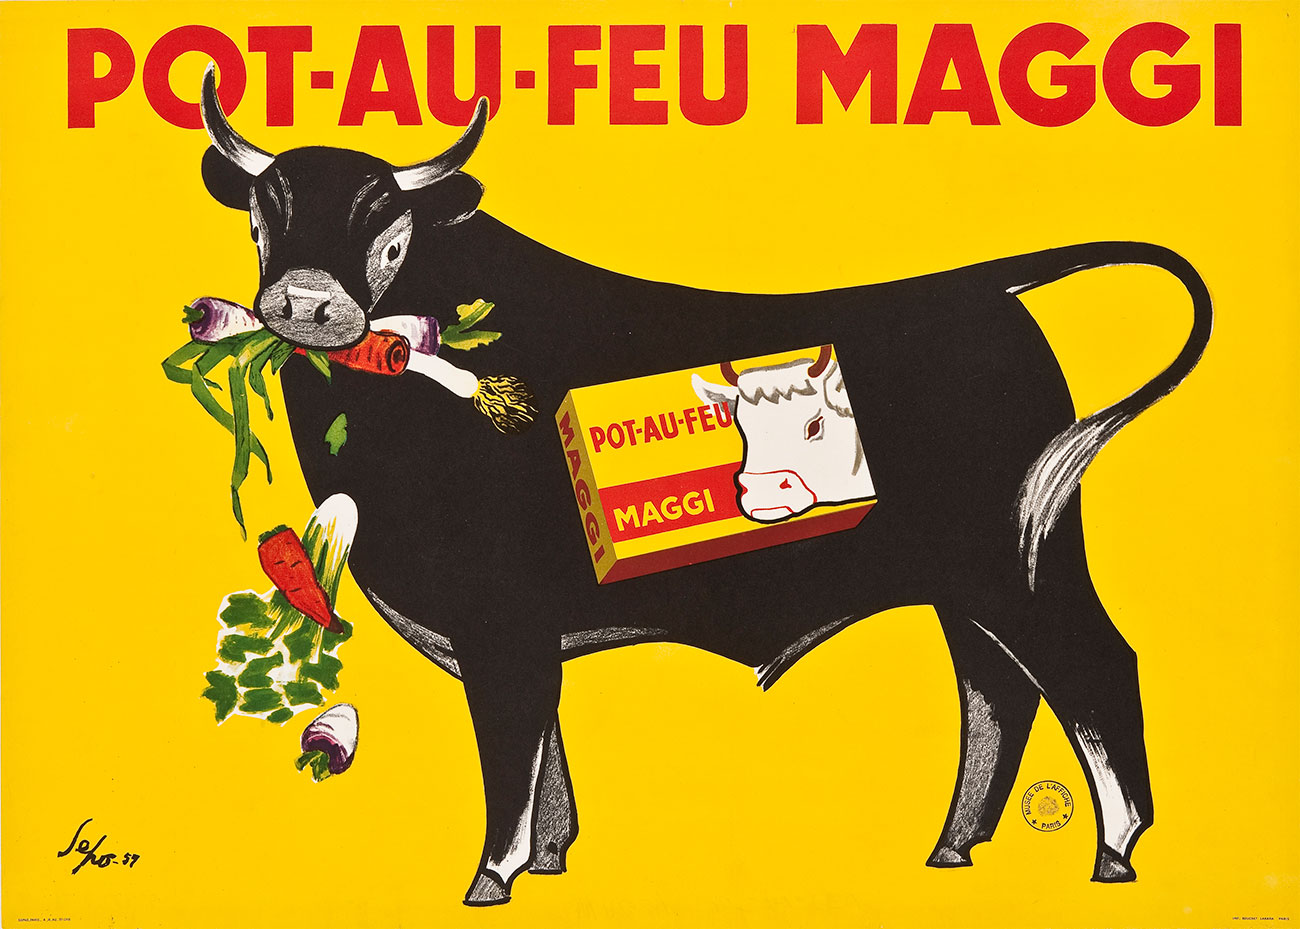 Stock in trade: an advertisement for pot-au-feu beef cubes, illustration by Severo Pozzati (Sepo), 1957.